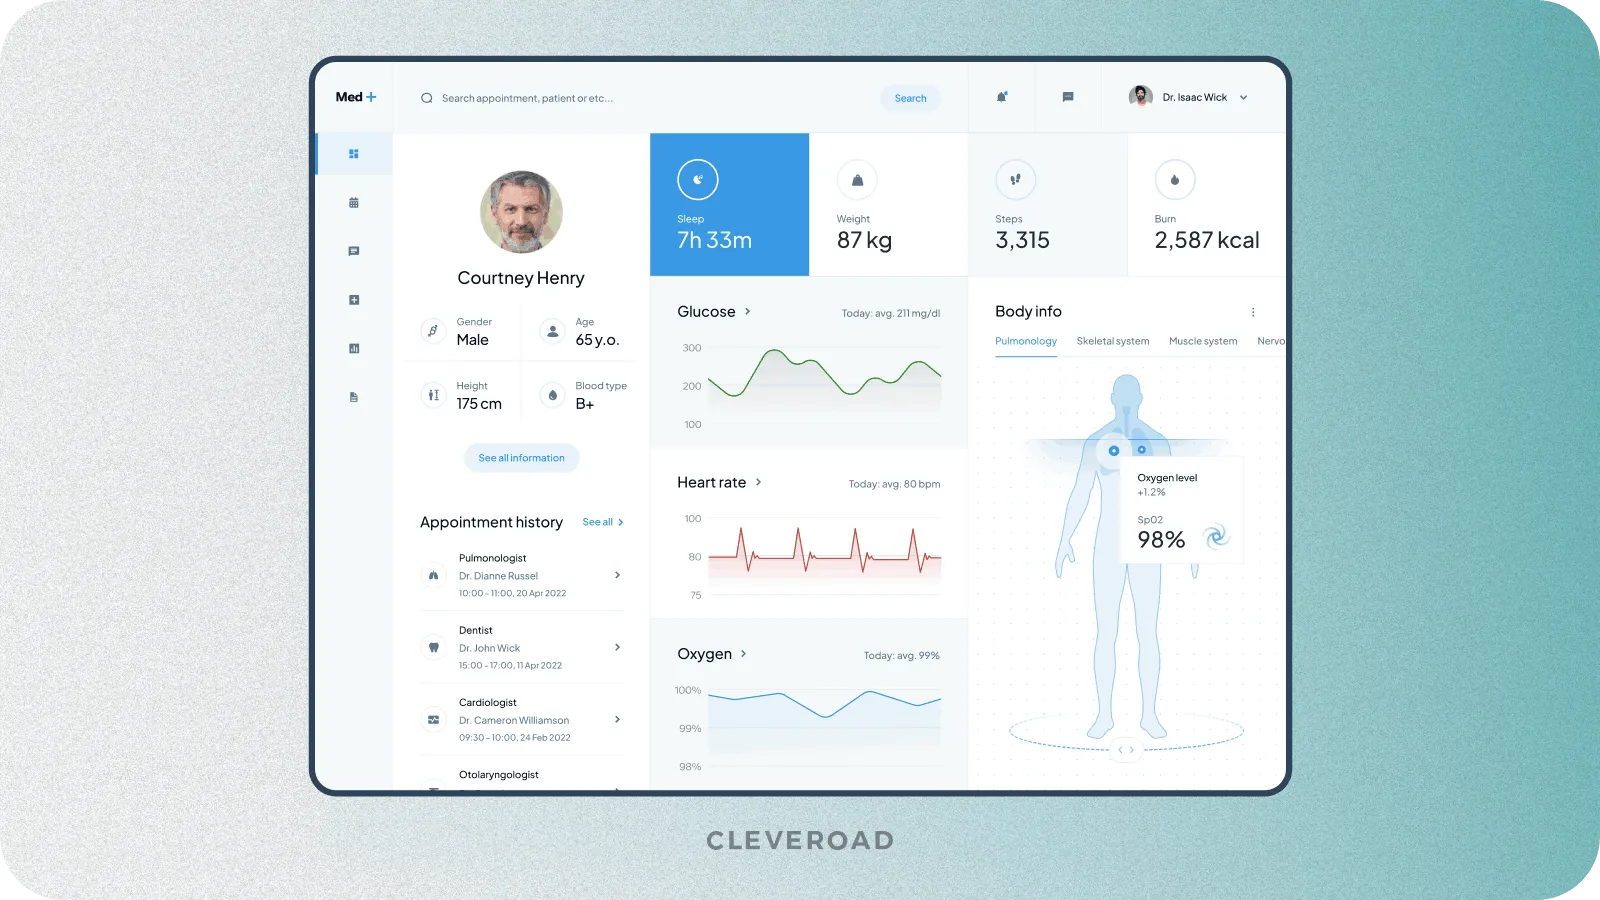 EHR system developed by Cleveroad